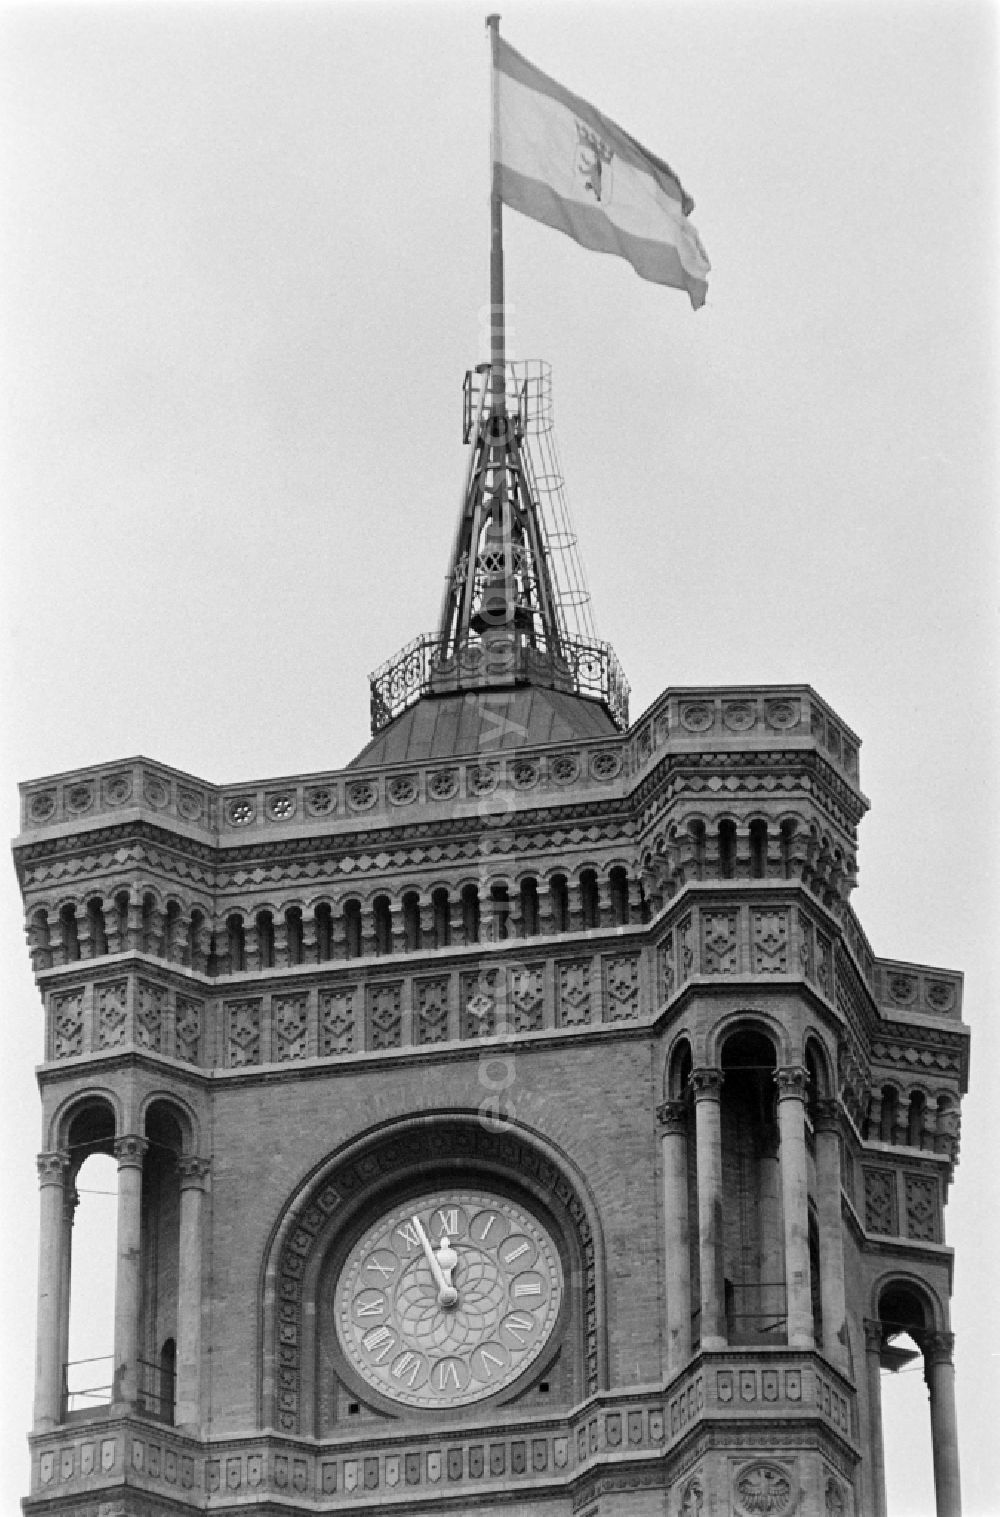 GDR image archive: Berlin - Town hall clock and Berlin flag at the Red Town Hall in Berlin-Mitte